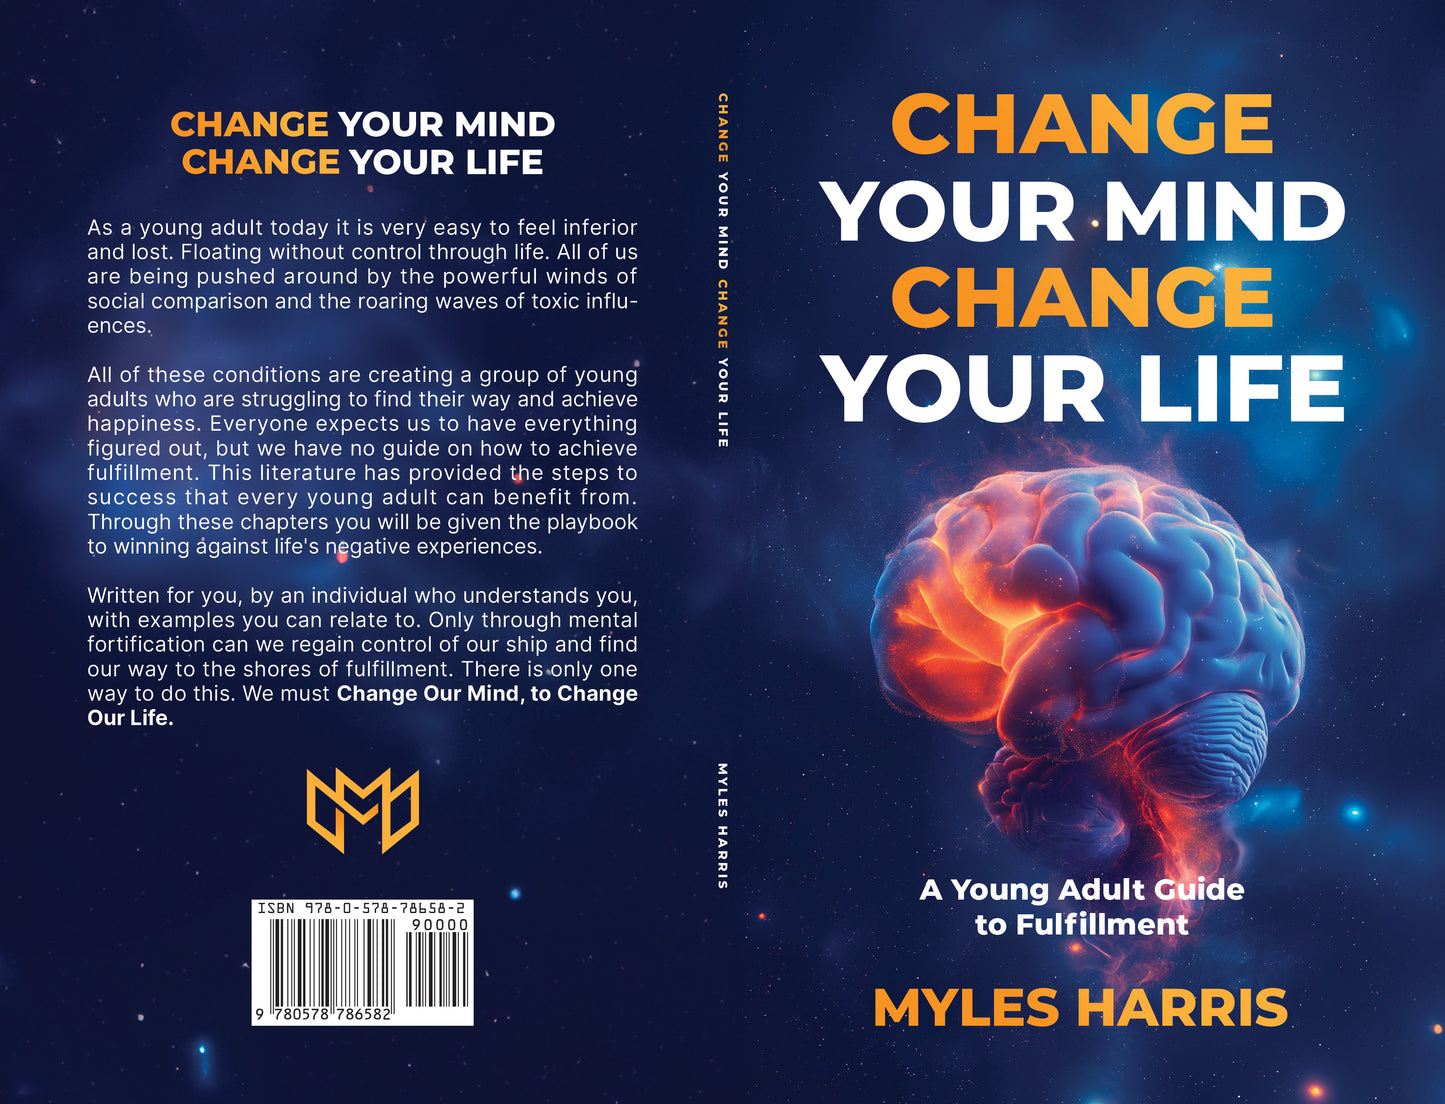 Change Your Mind, Change Your Life- A Young Adult Guide to Fulfillment